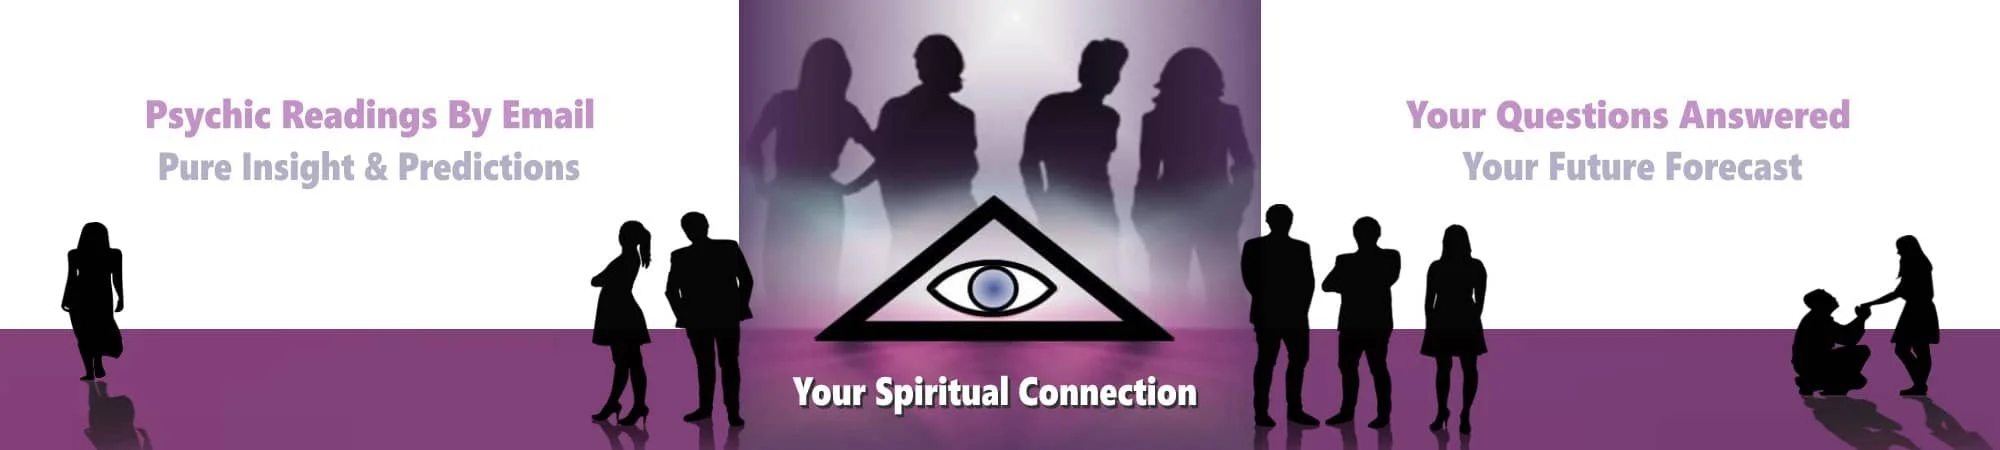 email psychic readings home